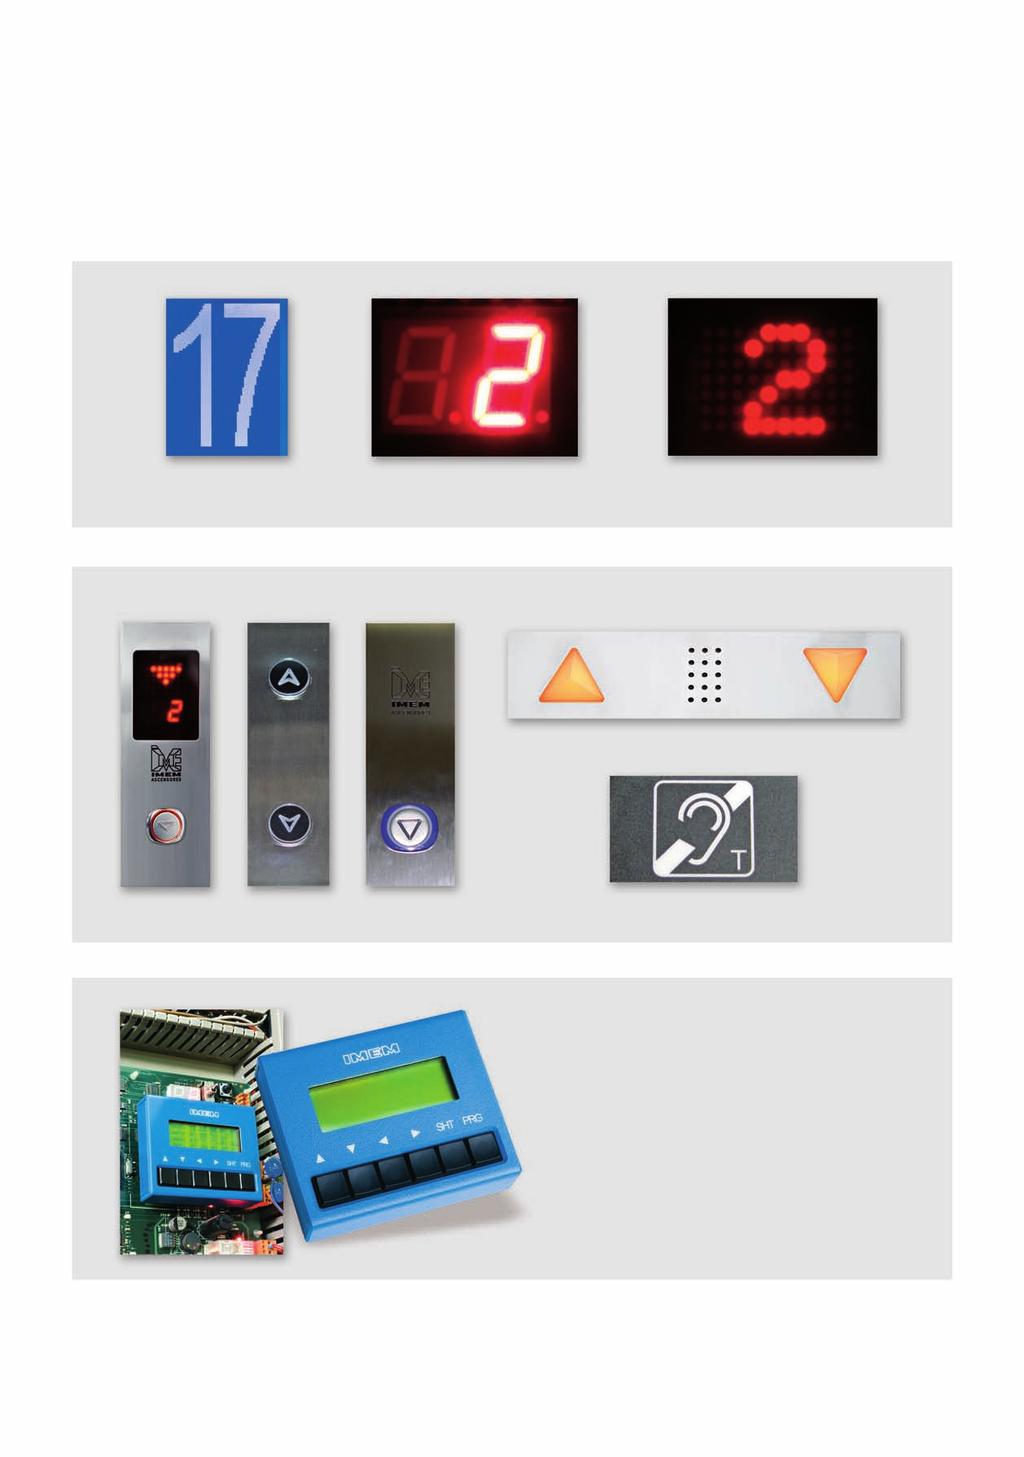 Displays LCD 7 SEGMENTS DOT MATRIX Push Buttons, Inductive Loop Autodialler; Lantern and Gong STANDARD IP54 EN81-70 Controller The new lift control Altamira is based on low power consumption